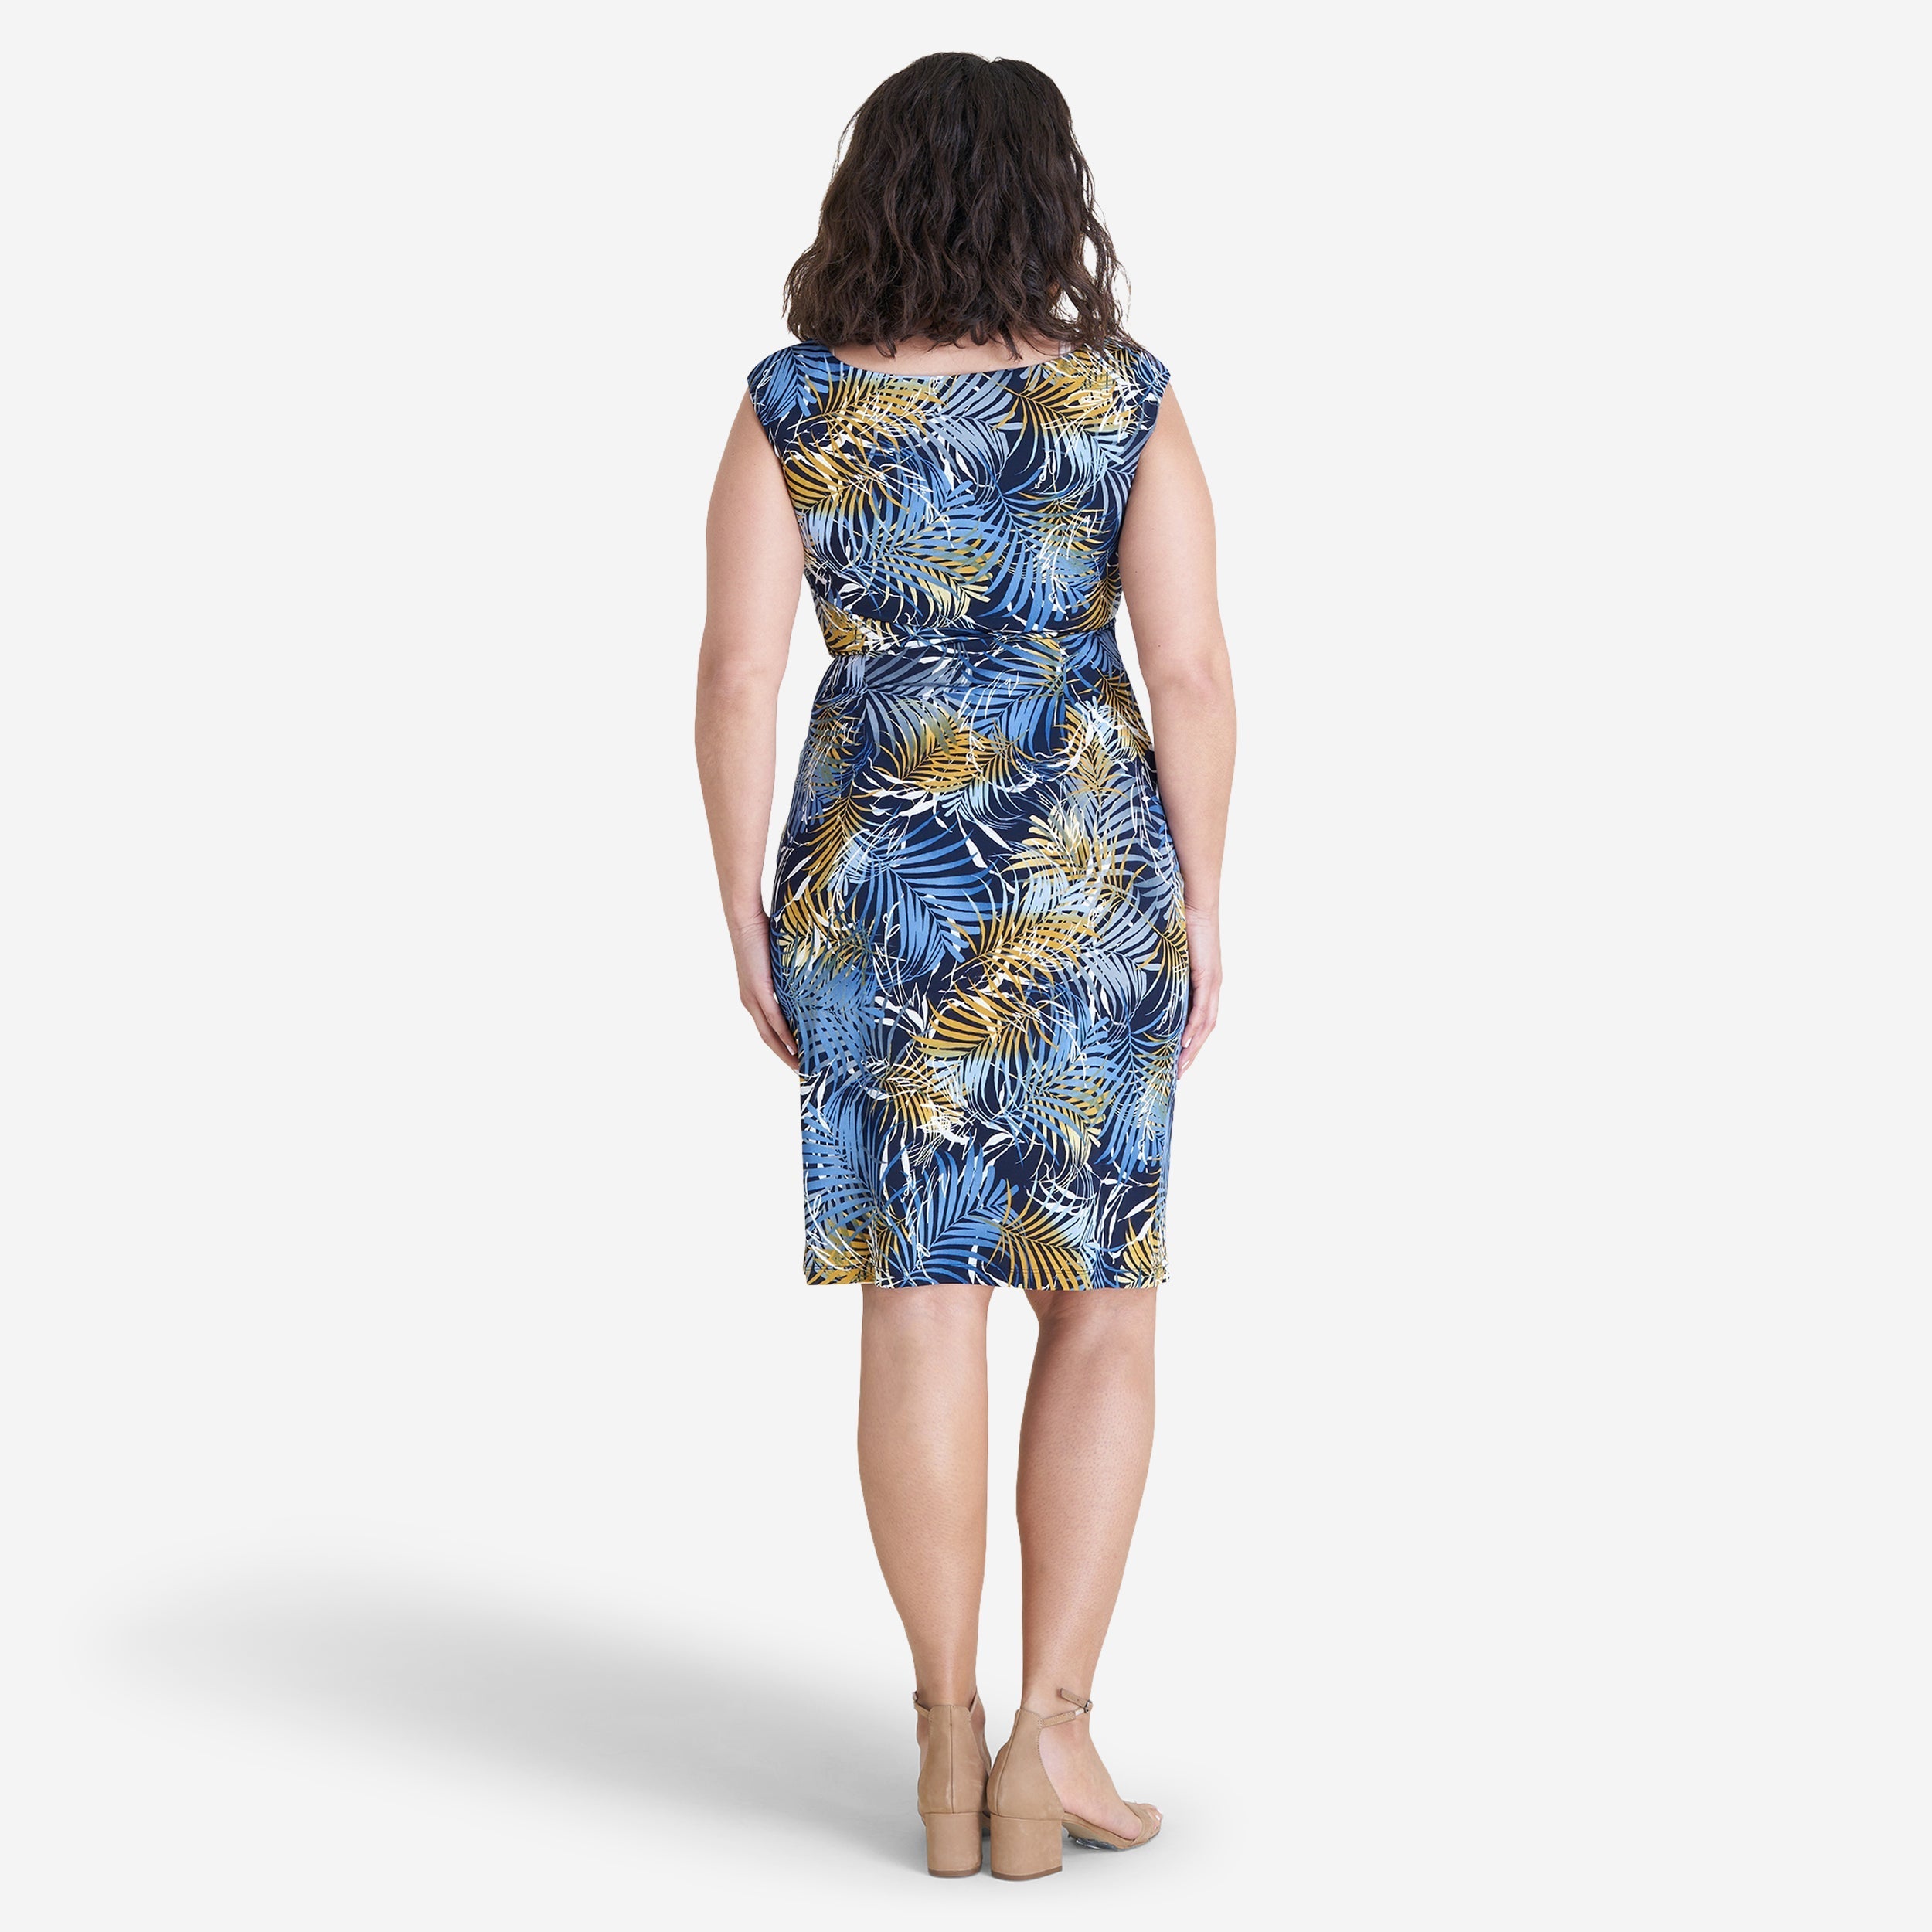 Woman posing wearing Navy/Mustard Lisa Faux Wrap Dress from Connected Apparel